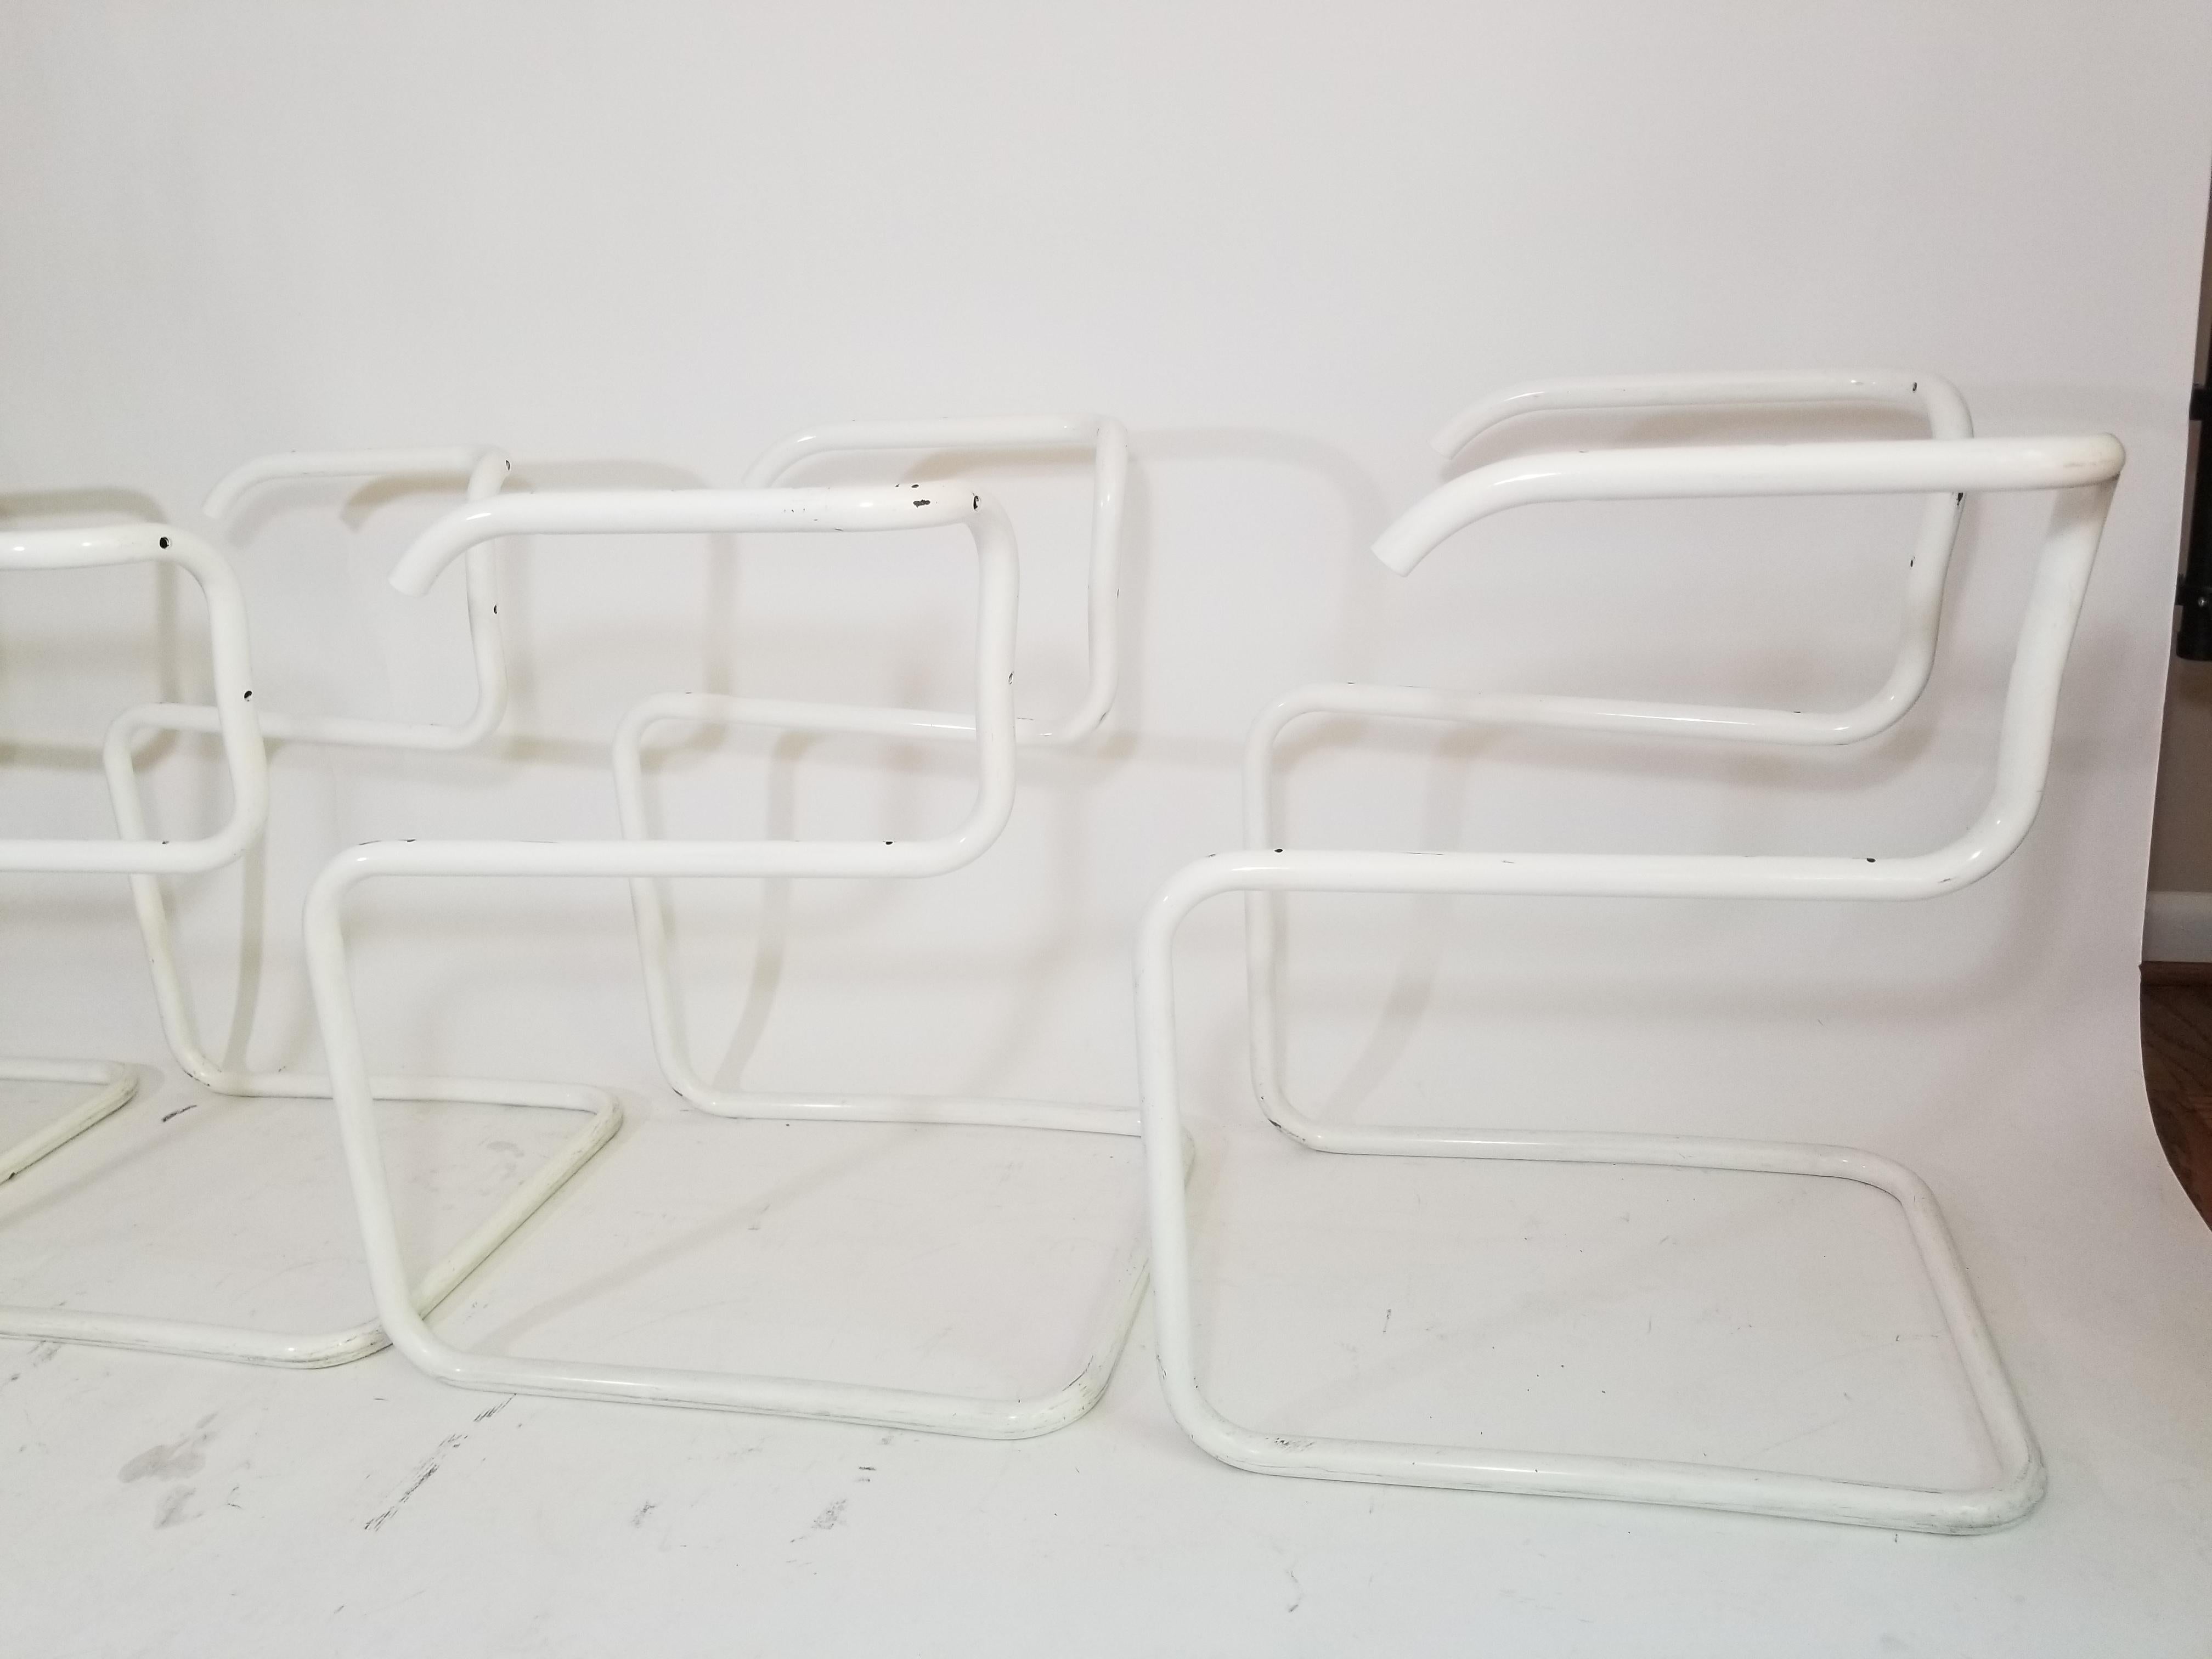 Rare Marcel Breuer Cesca Knoll Frames in White Powder Coating Set of 4 In Excellent Condition For Sale In New York, NY